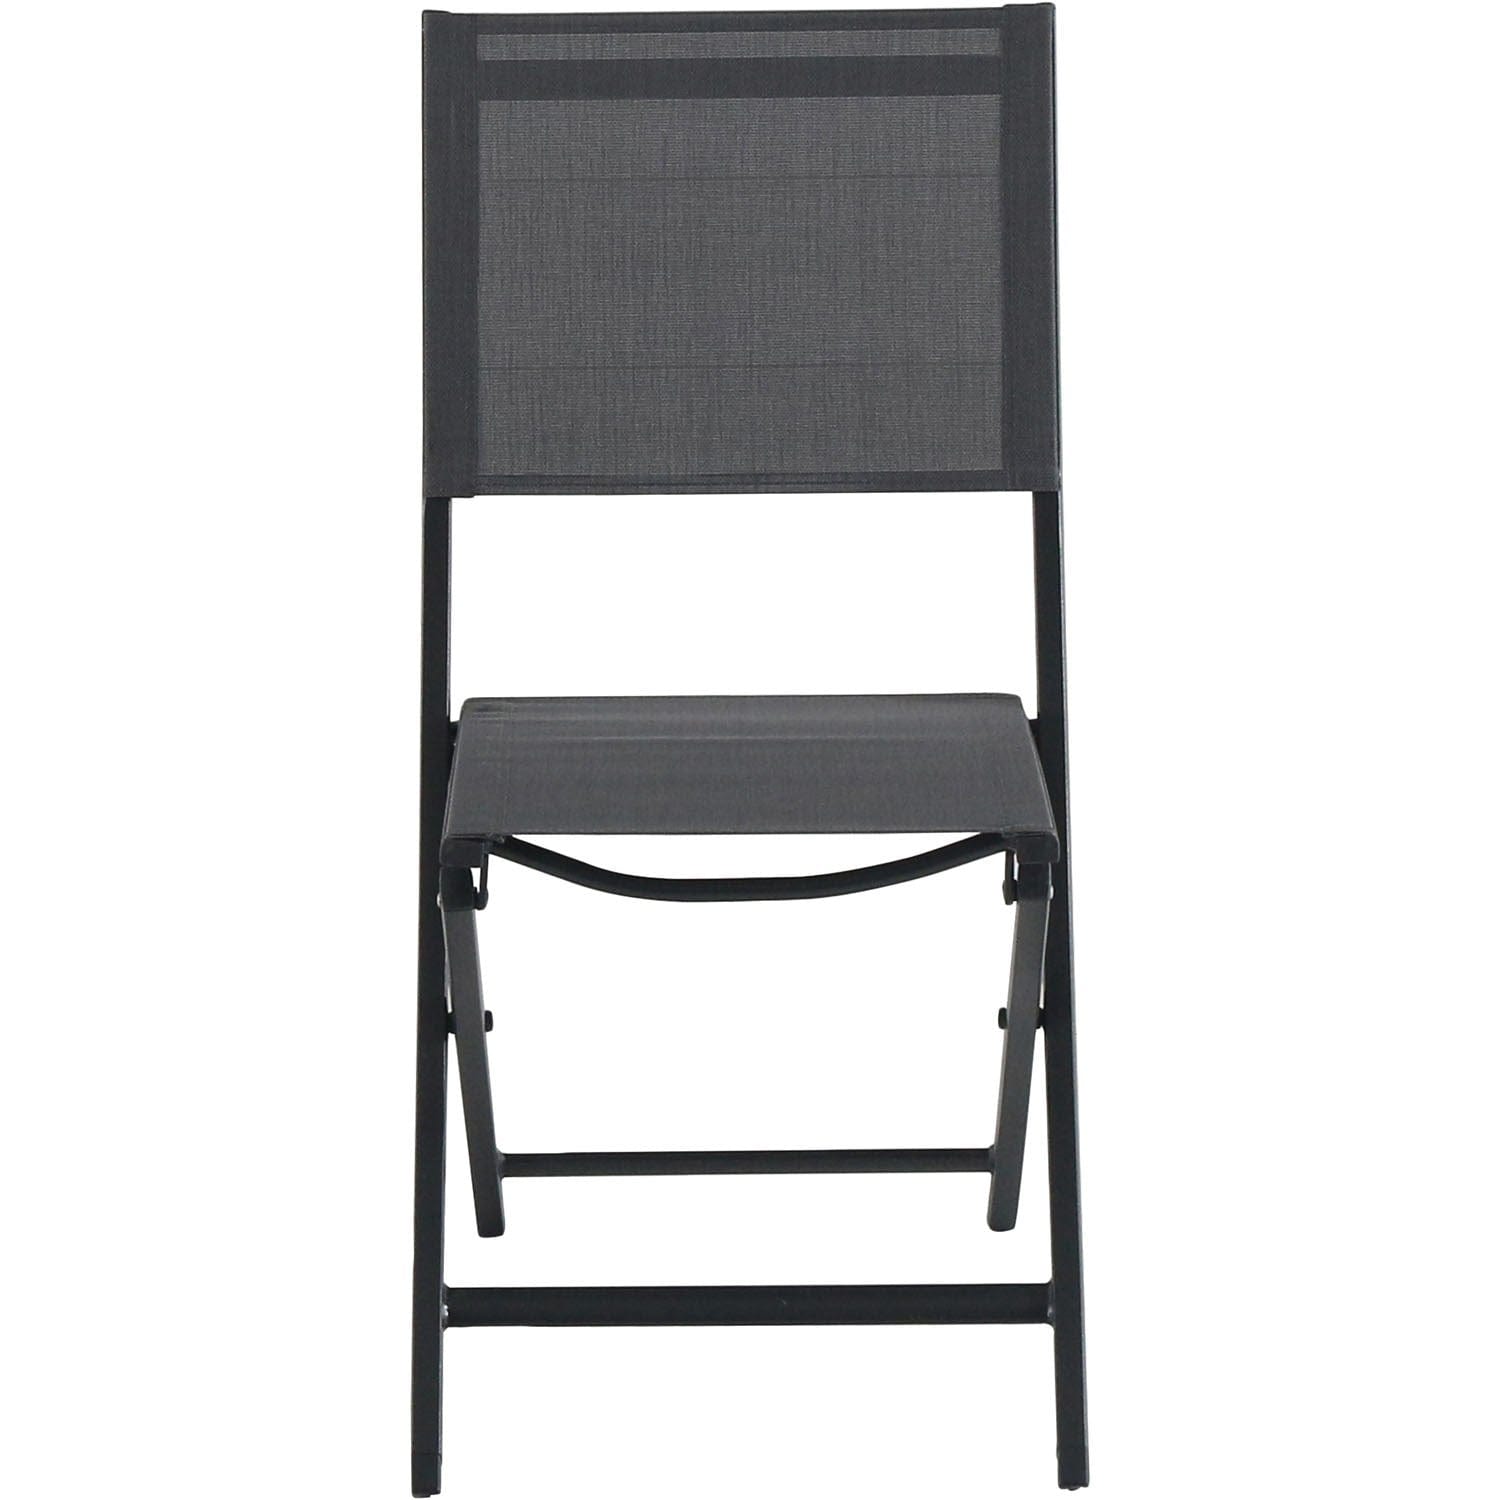 Hanover Outdoor Dining Set Hanover Del Mar 9-Piece Outdoor Dining Set with 8 Folding Sling Chairs in Gray and a White 40" x 118" Expandable Dining Table | DELDN9PCFD-WG